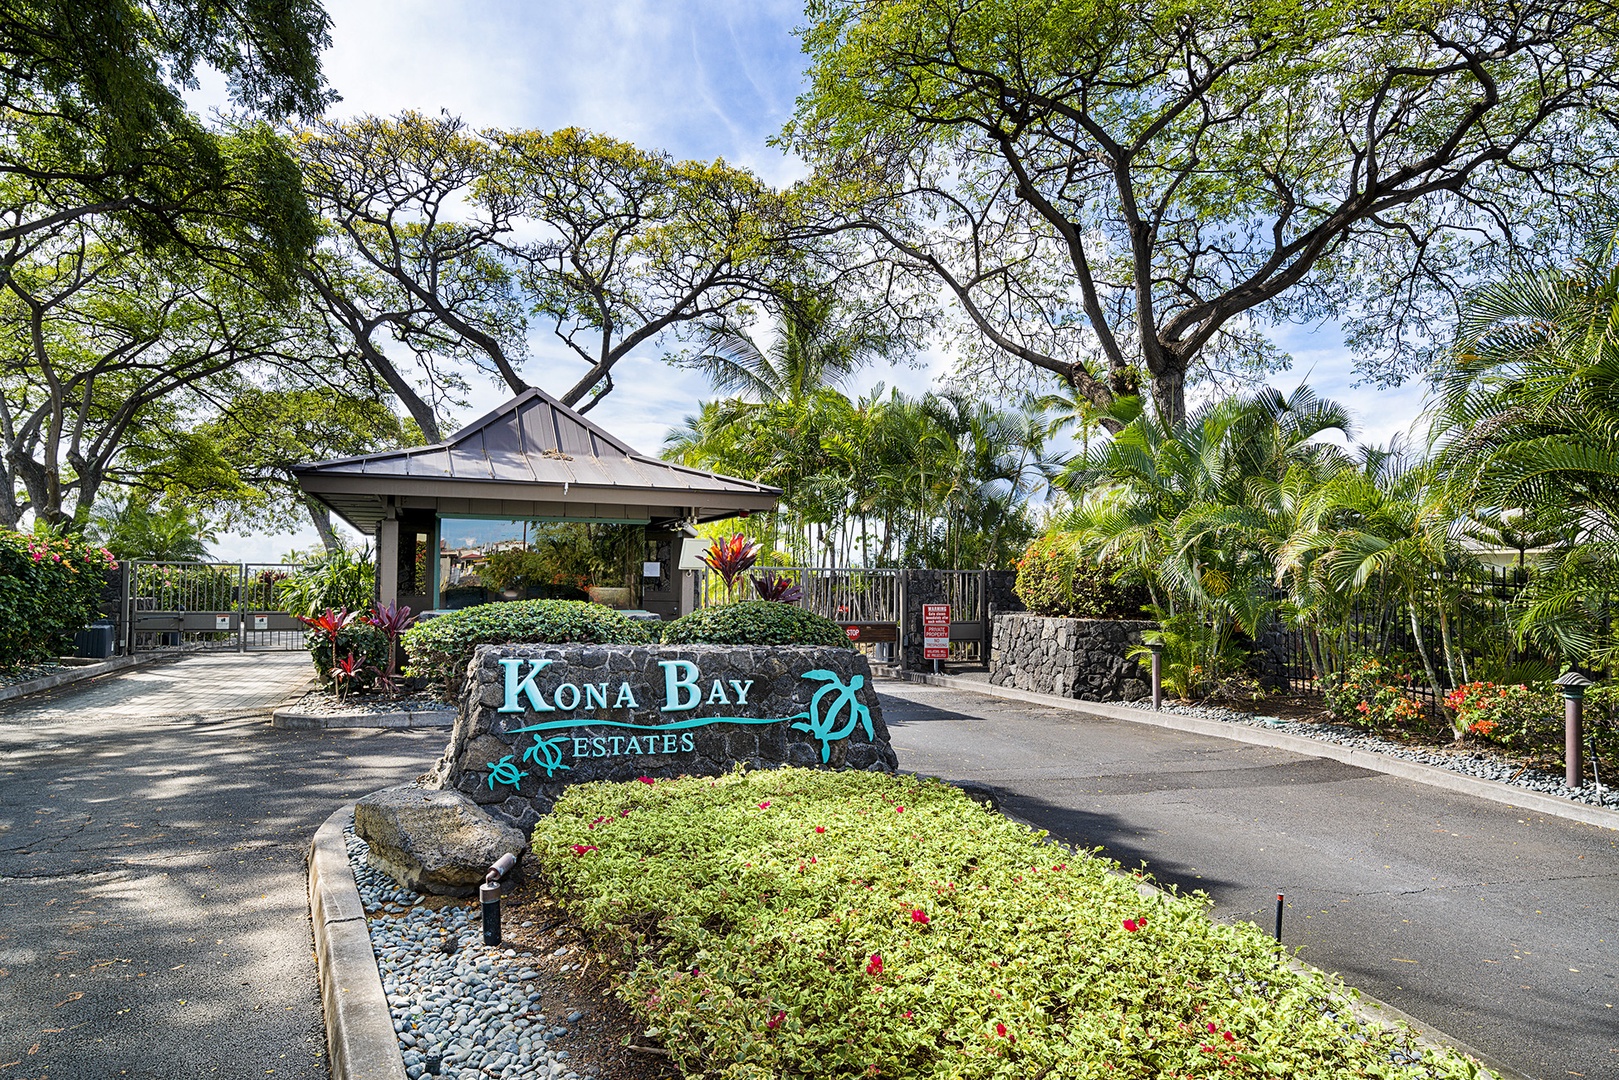 Kailua Kona Vacation Rentals, Mermaid Cove - Gated entry to the complex